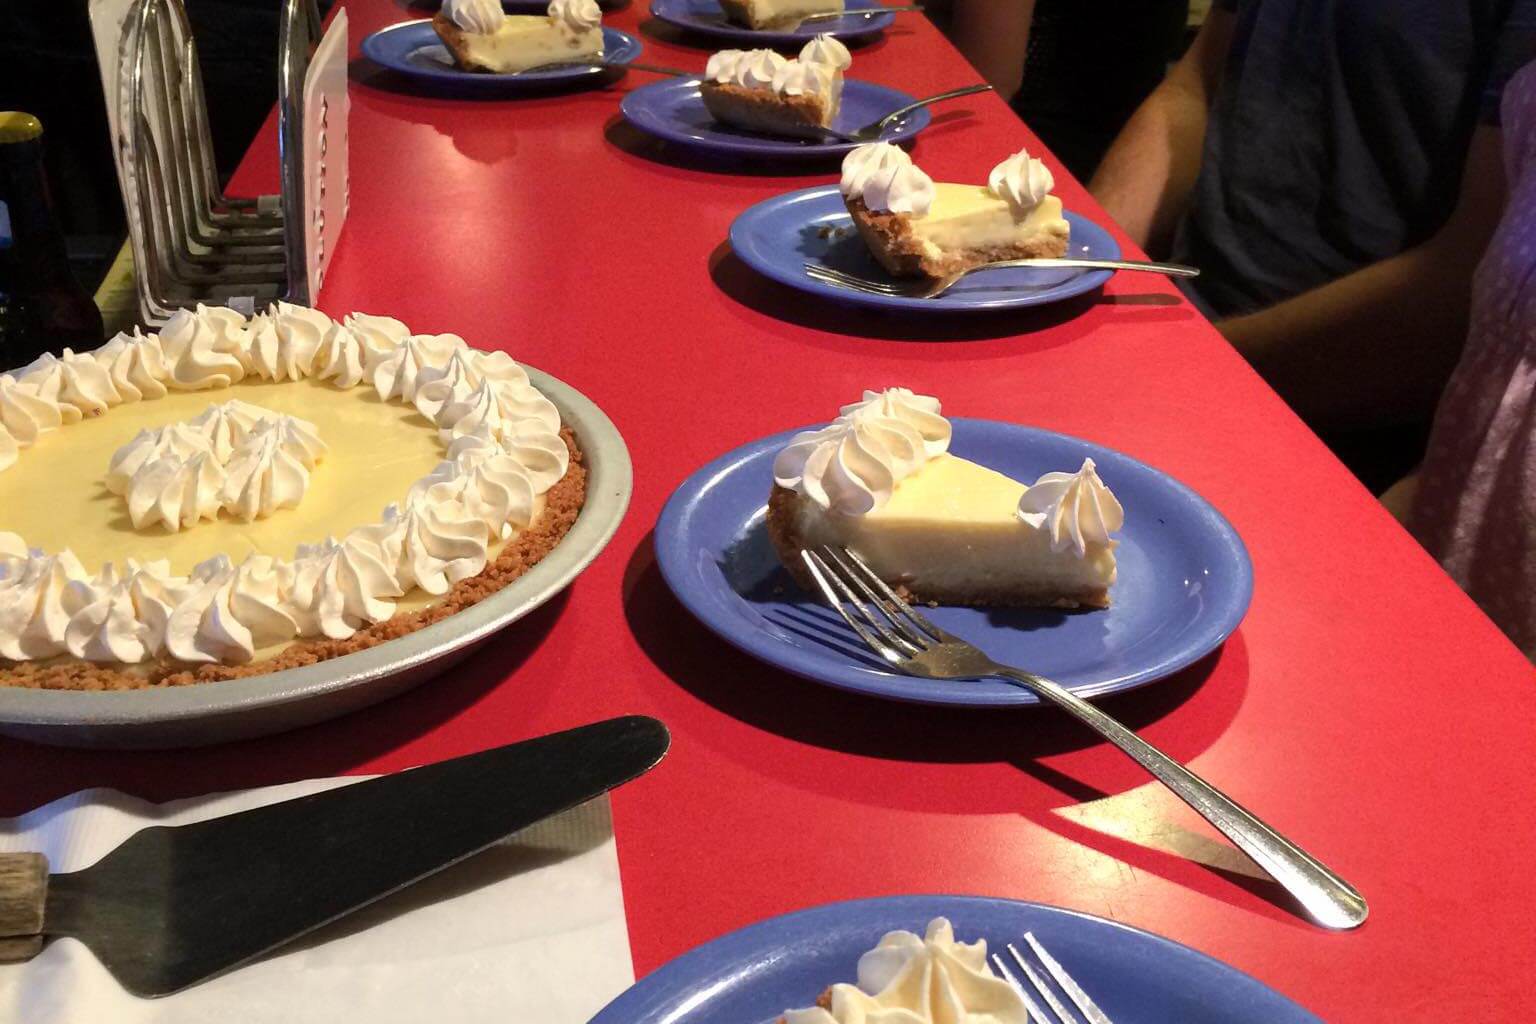 Key Lime pie and slices of key lime pie. 